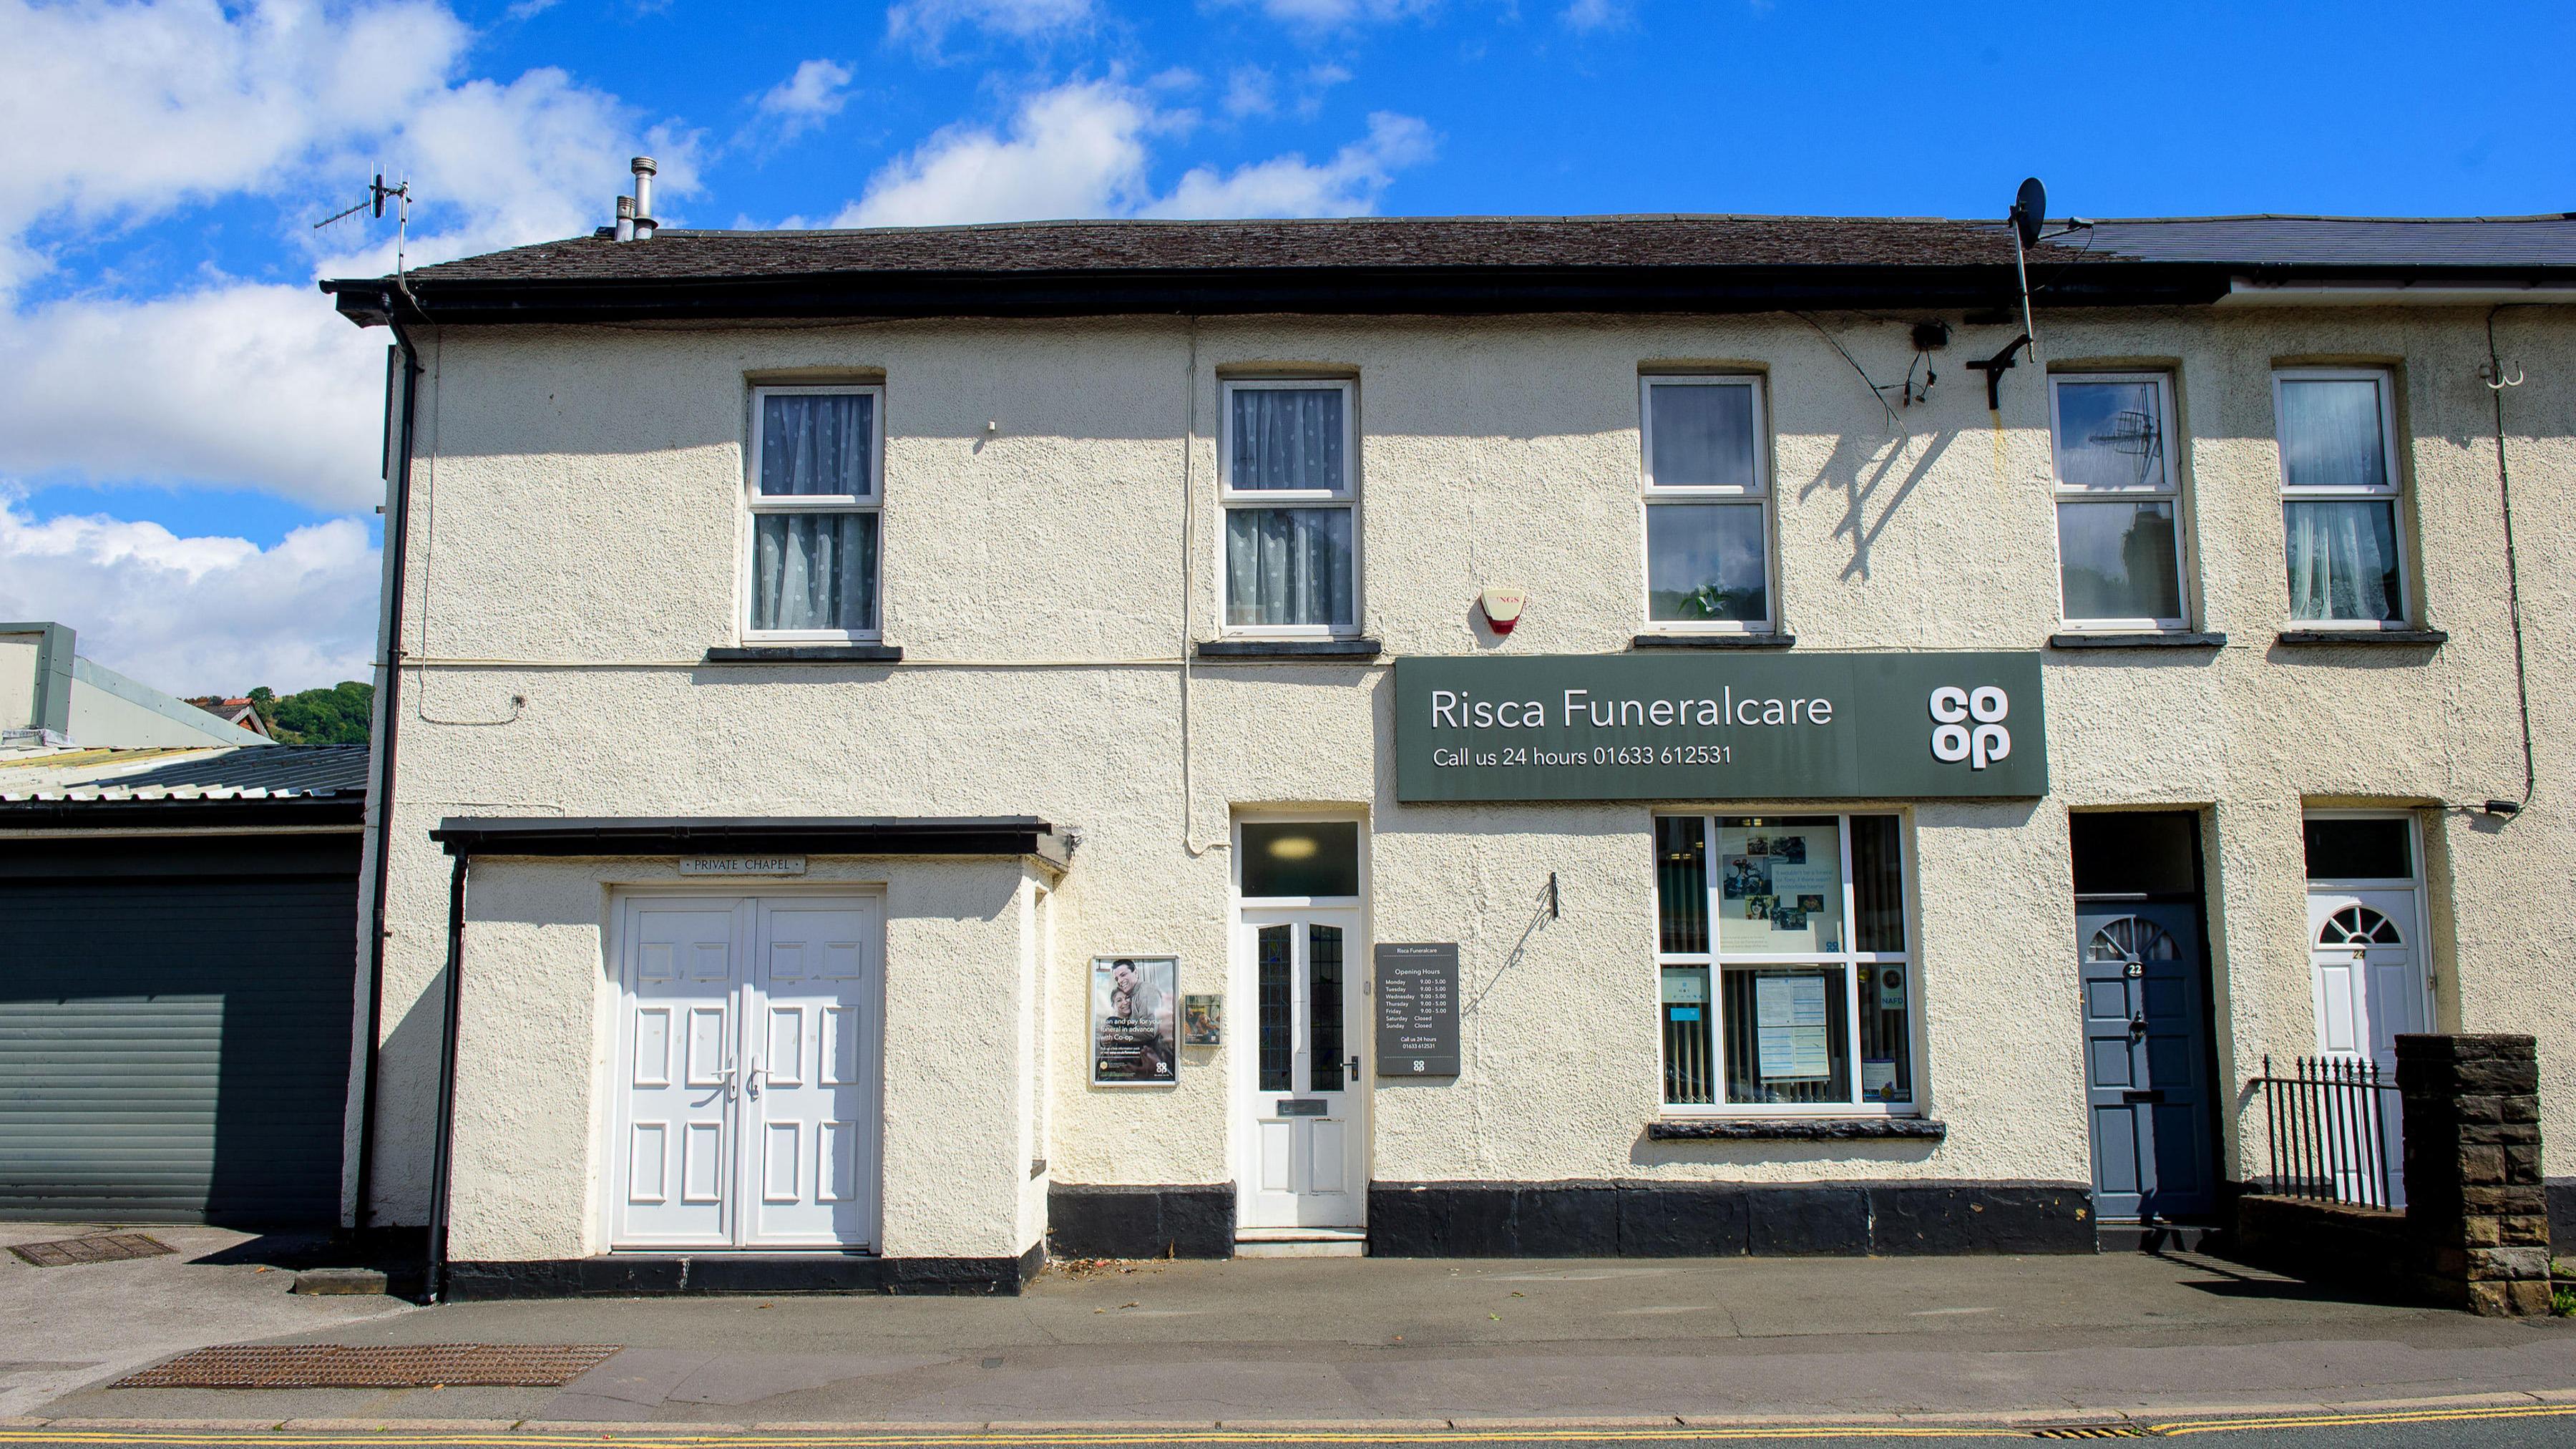 Images Risca Funeralcare